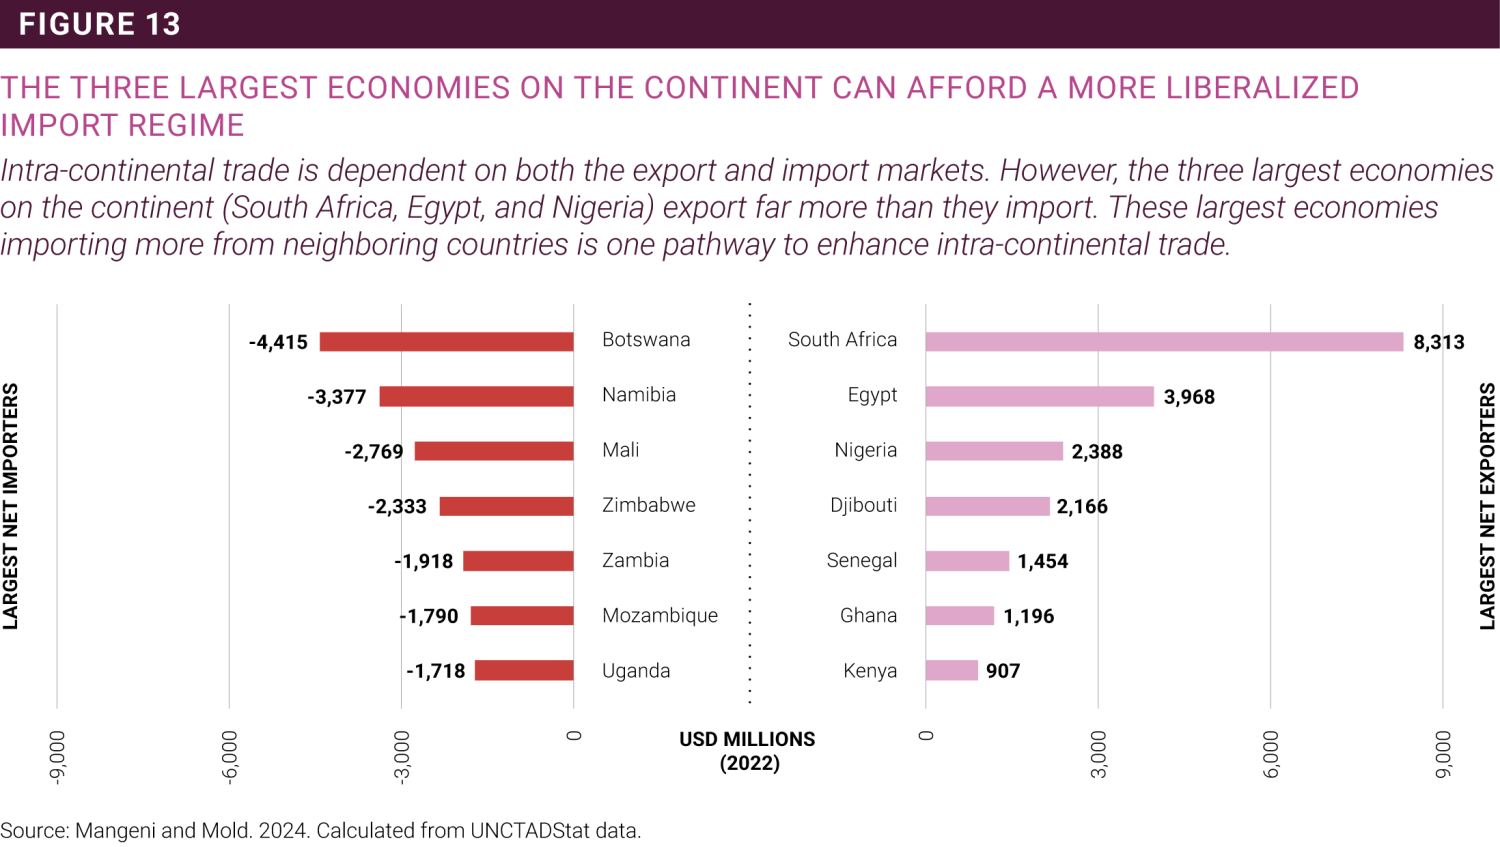 The 3 largest economies in Africa can afford a more liberalized import regime